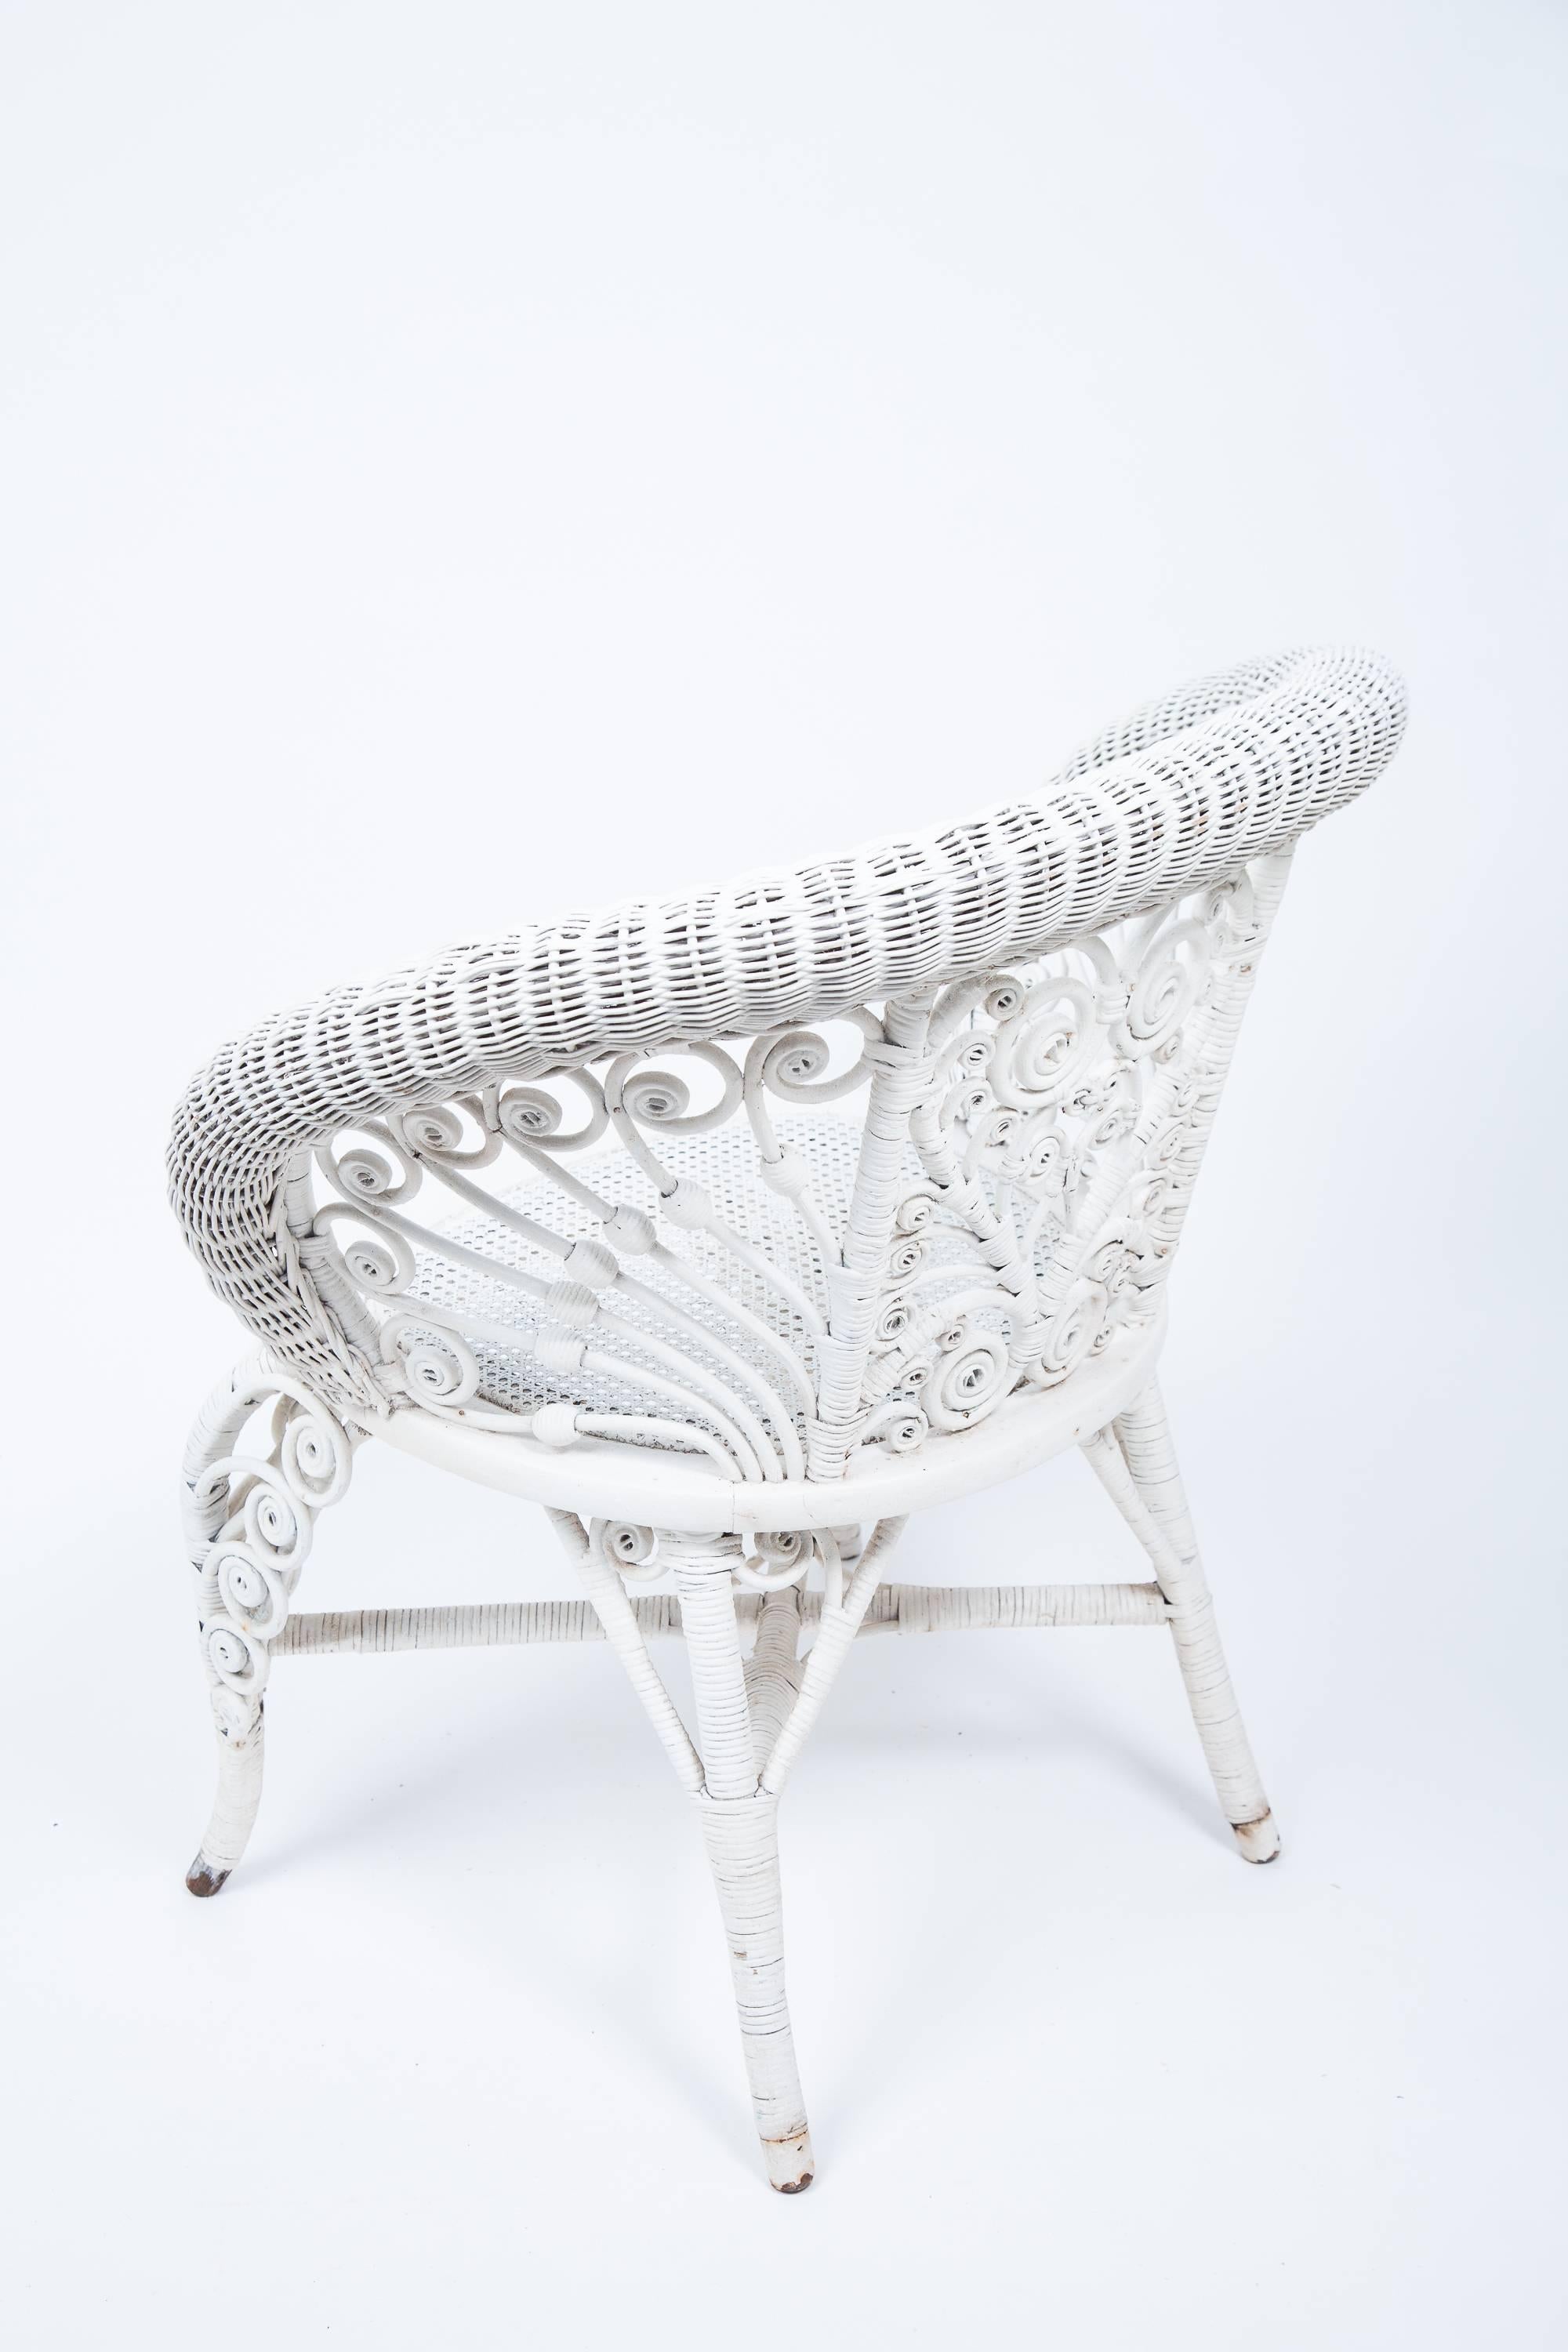 Heywood Company Victorian White Wicker Parlour Armchair Set For Sale 1